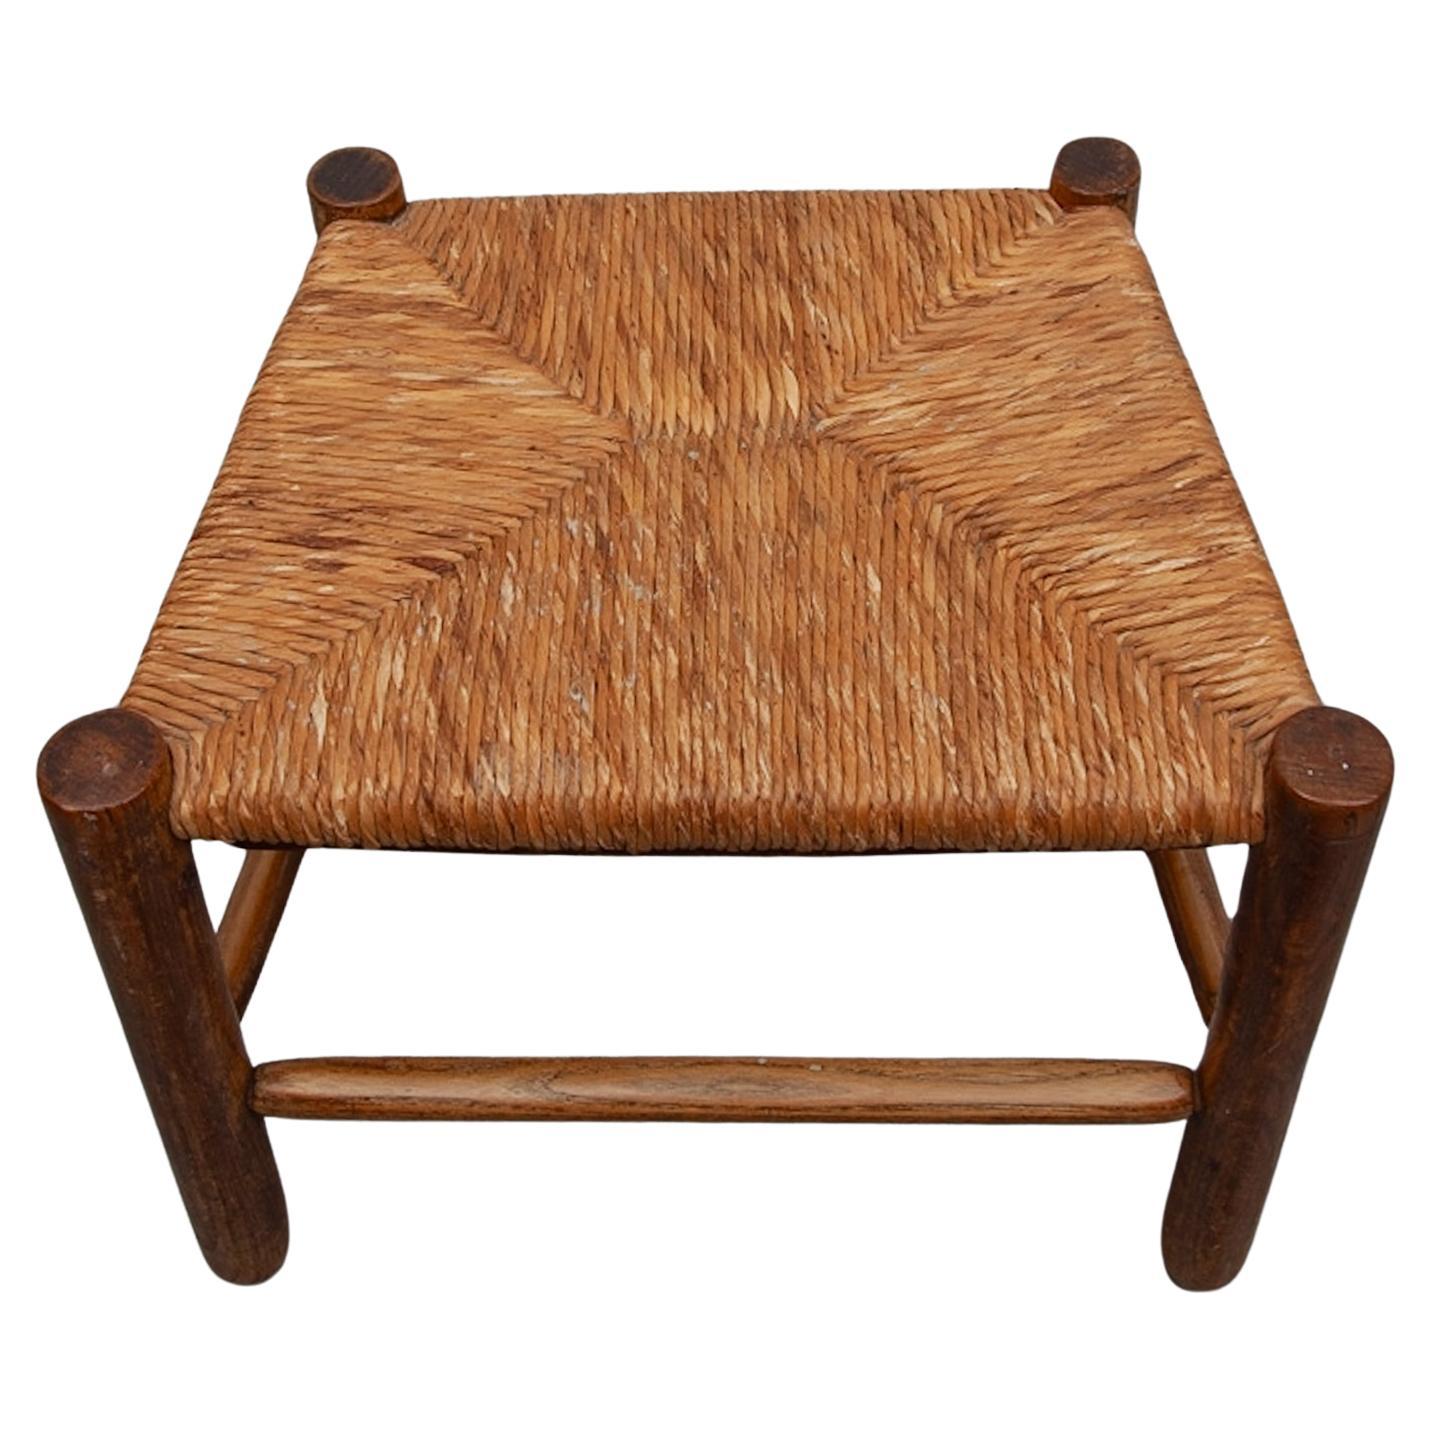 Antique Stool France Dordogne attributed to Charlotte Perriand for Robert For Sale